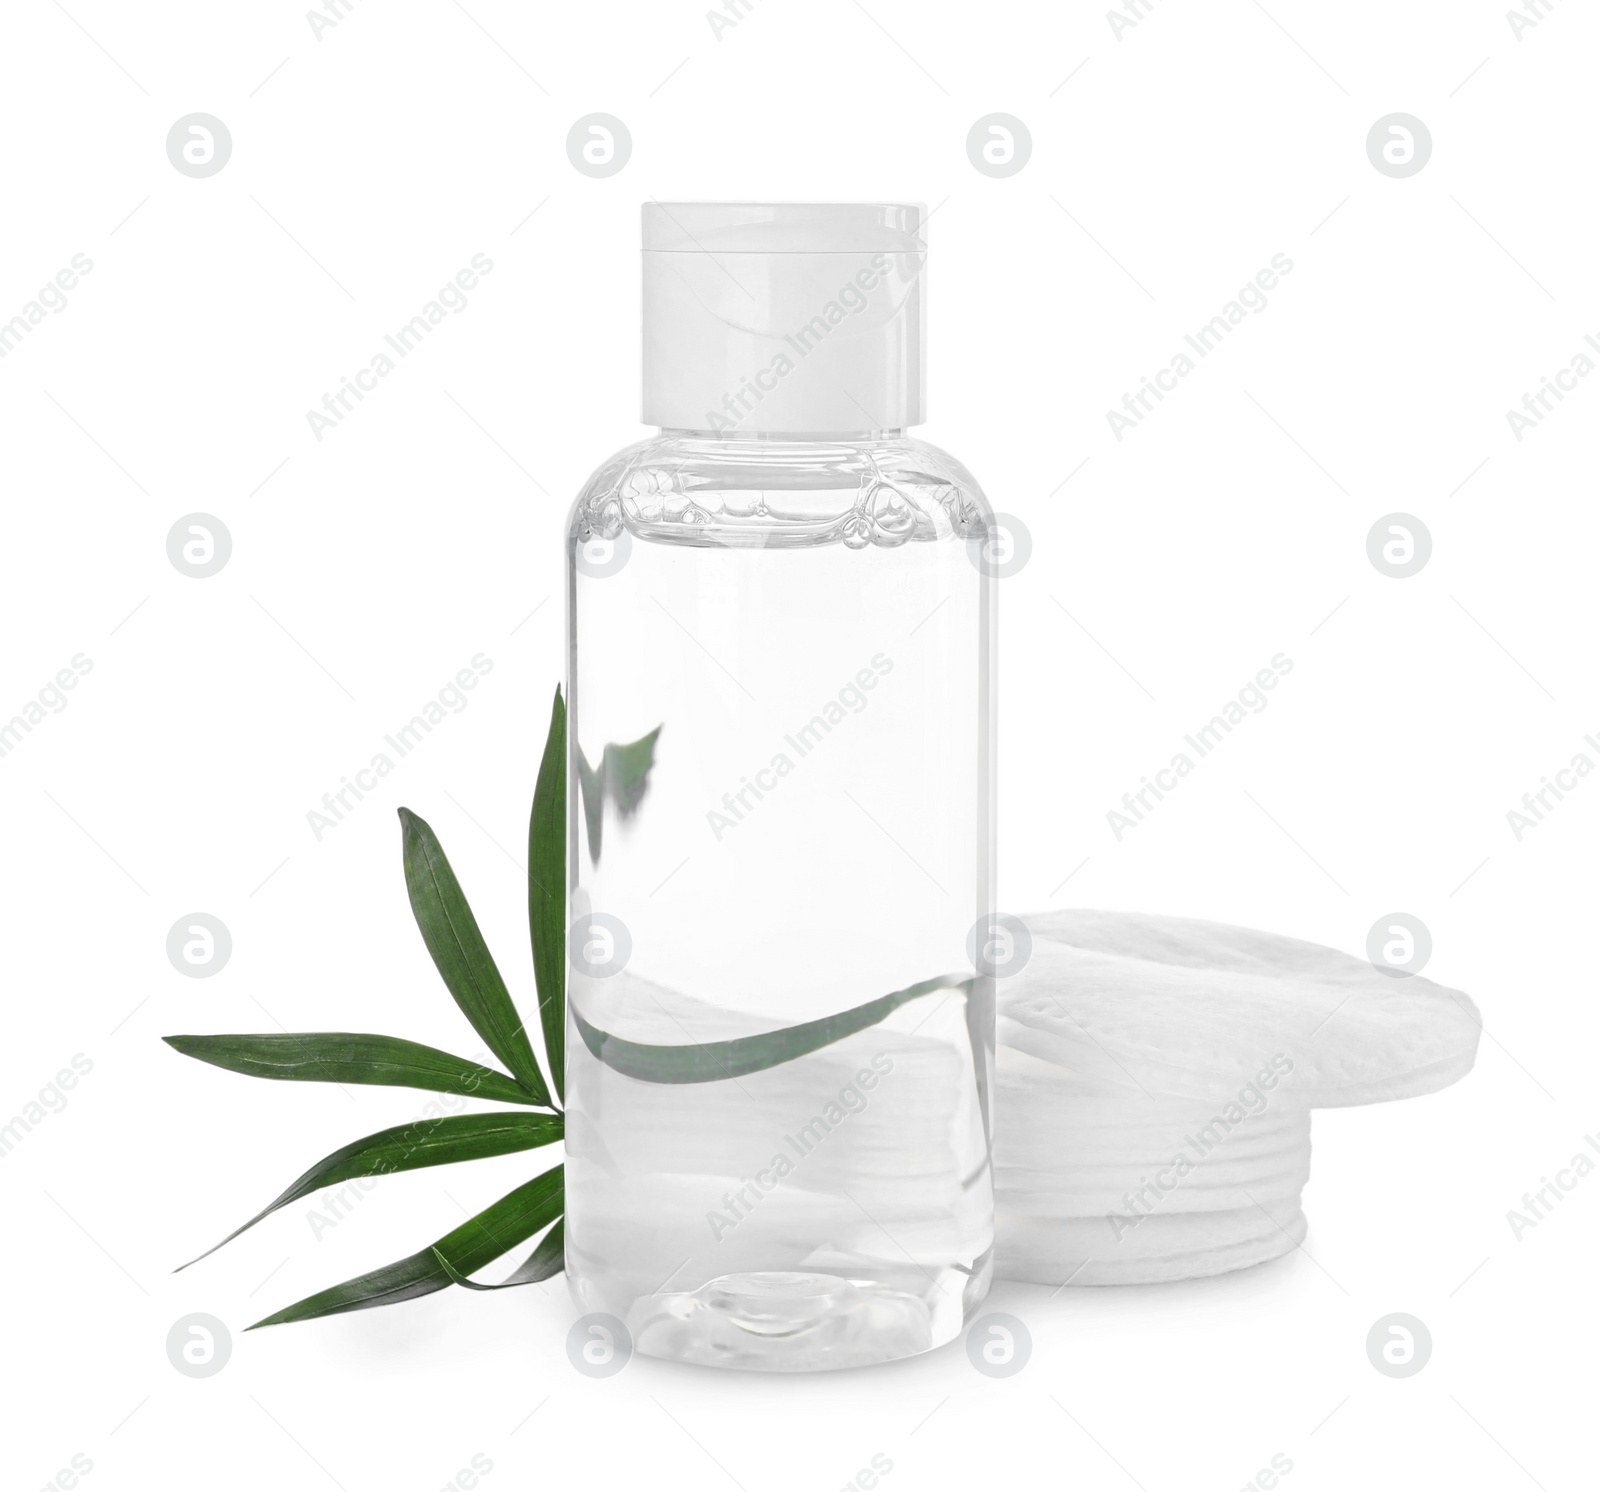 Photo of Bottle of micellar cleansing water, cotton pads and green twig on white background